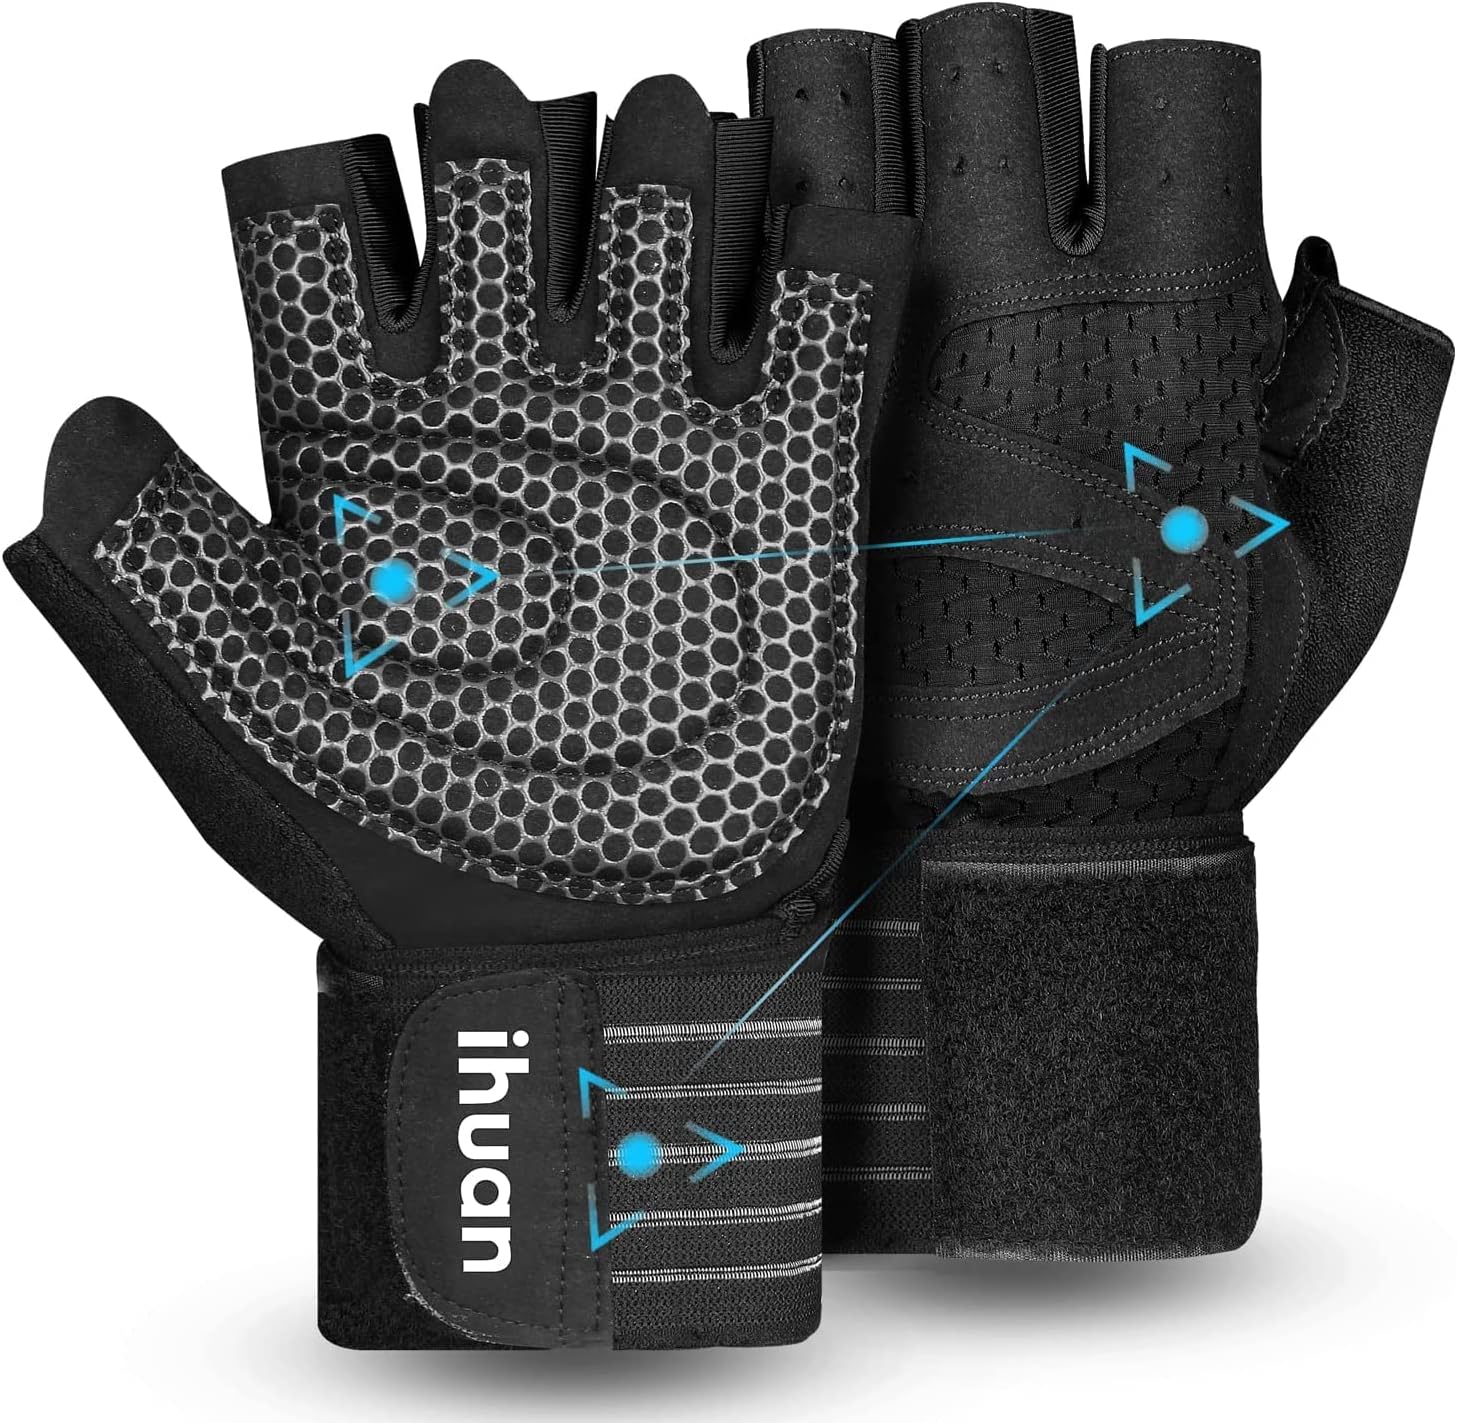 ihuan Ventilated Weight Lifting Gym Workout Gloves Review